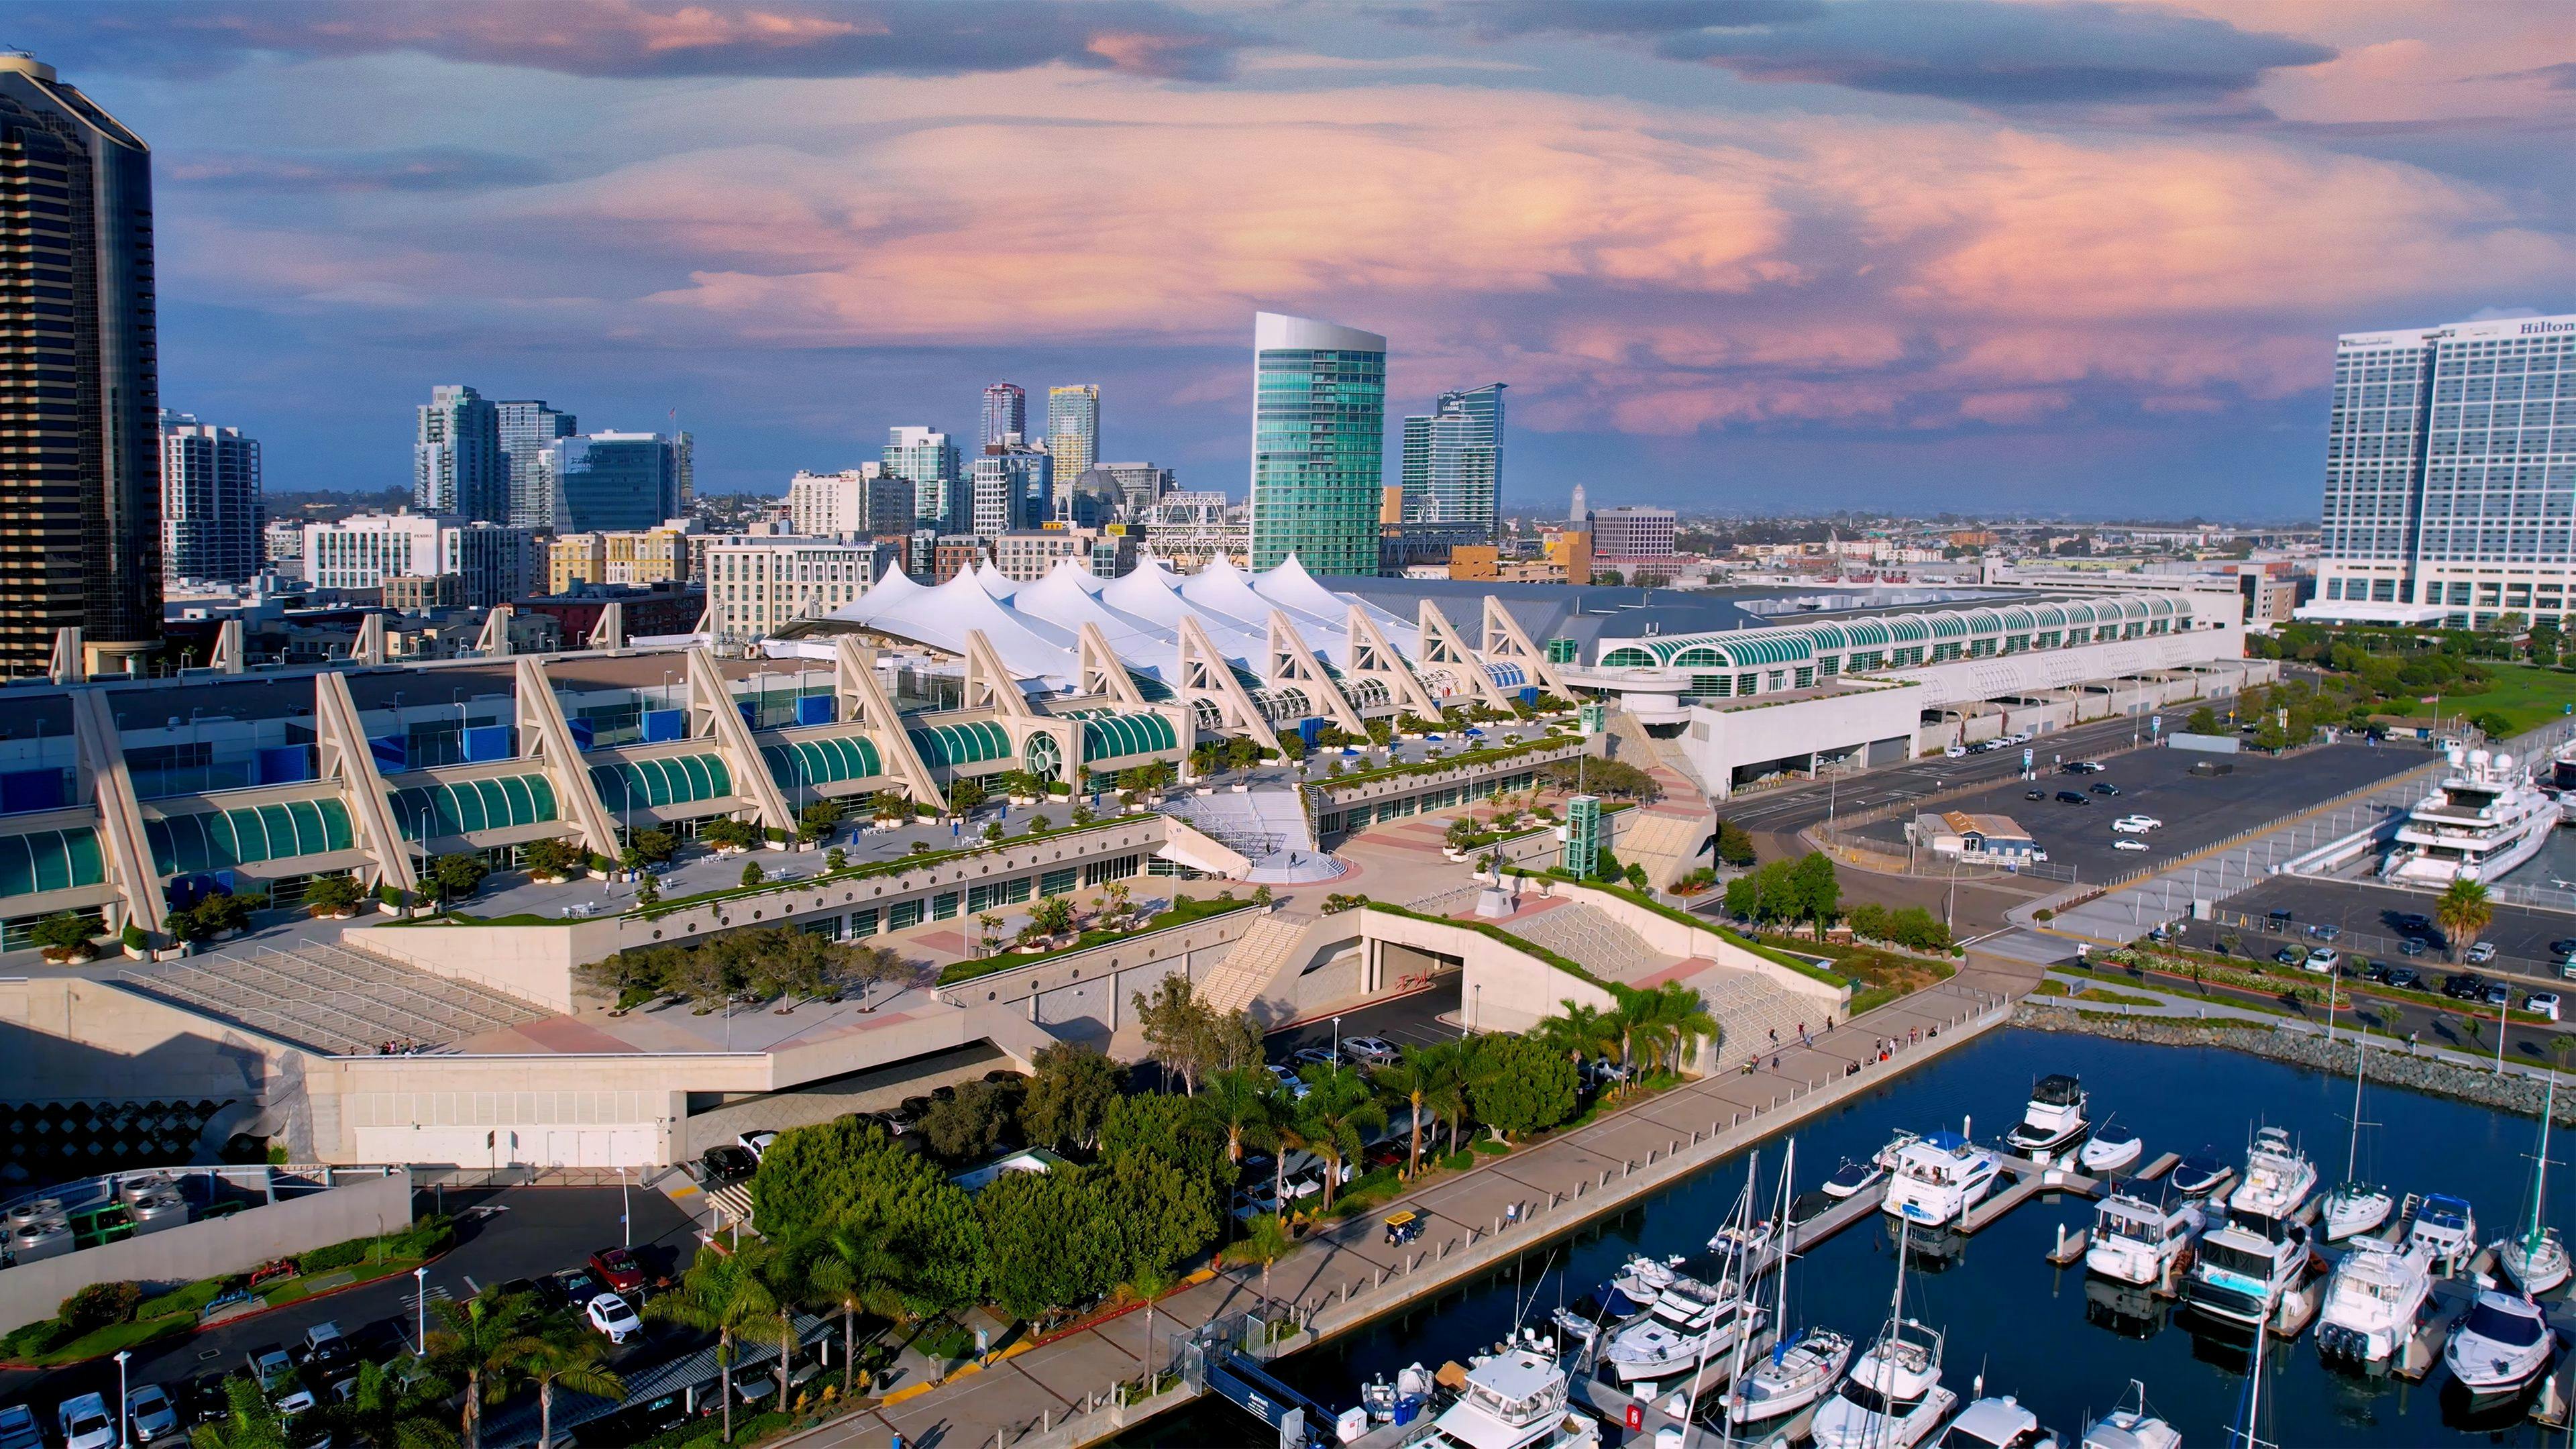 San Diego Convention Center, where the HPLC Conference was held